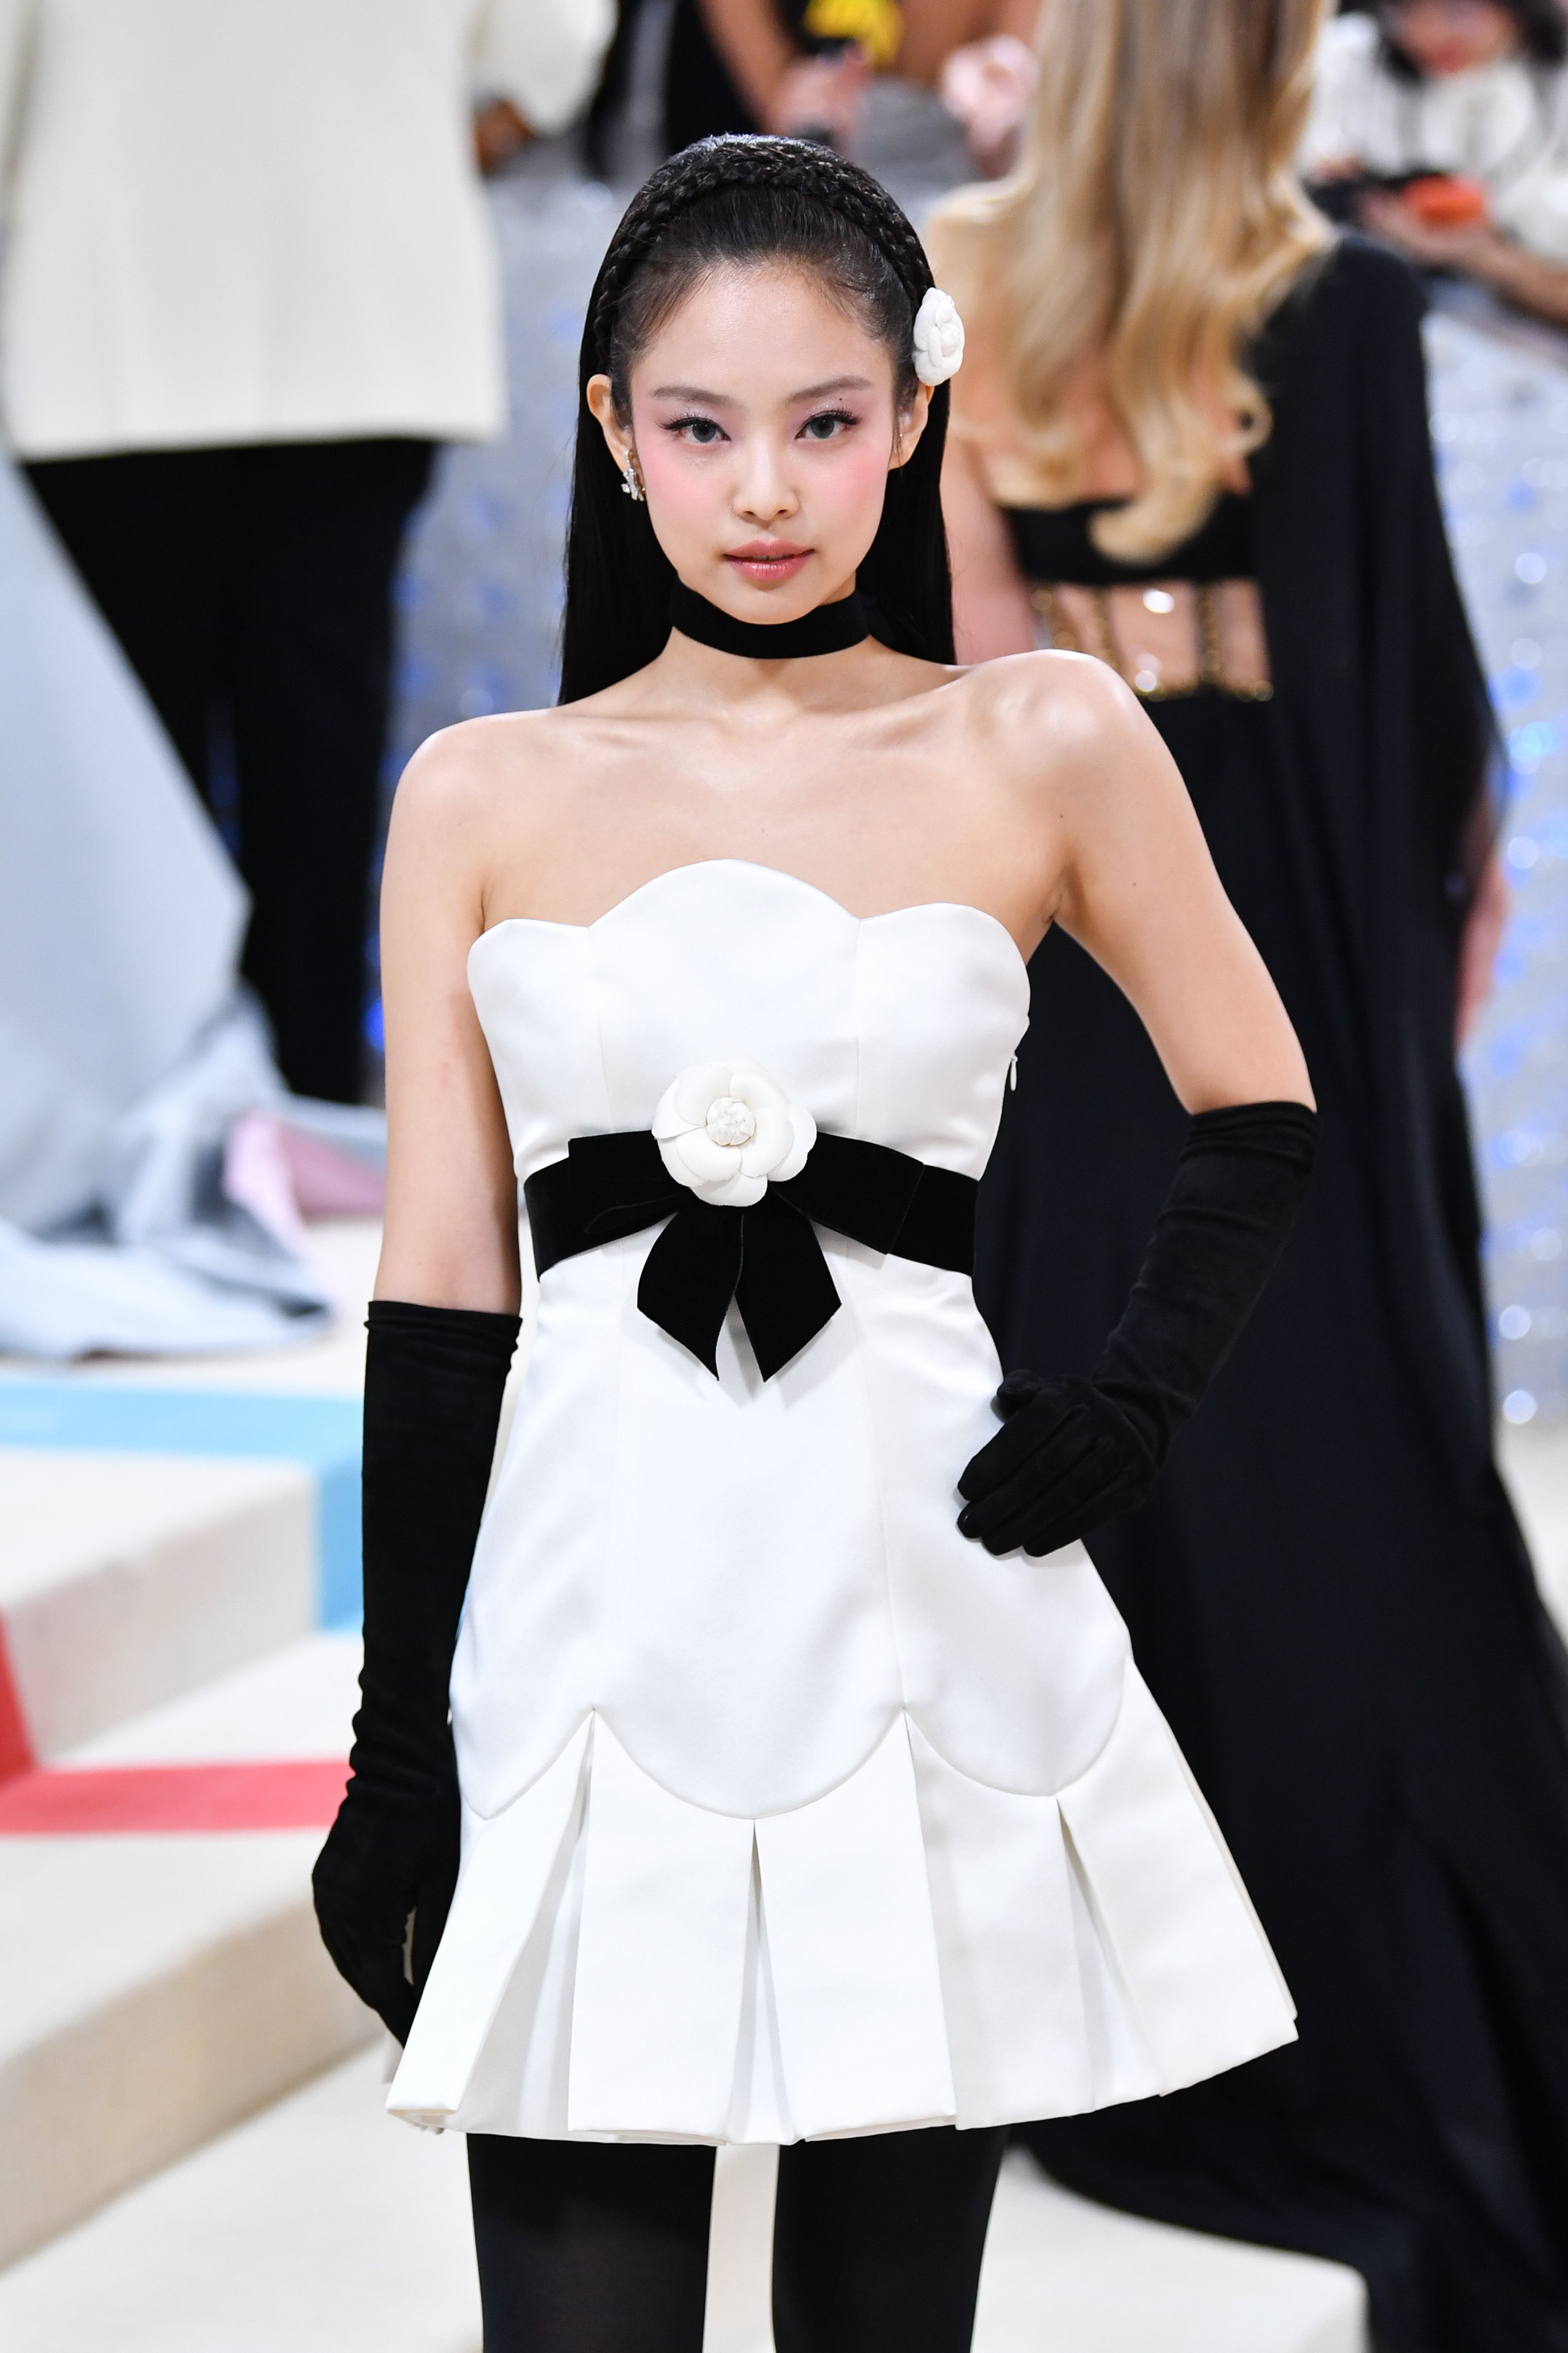 Jennie Wore a Debutantecore Chanel Wedding Dress on the Cannes Red Carpet